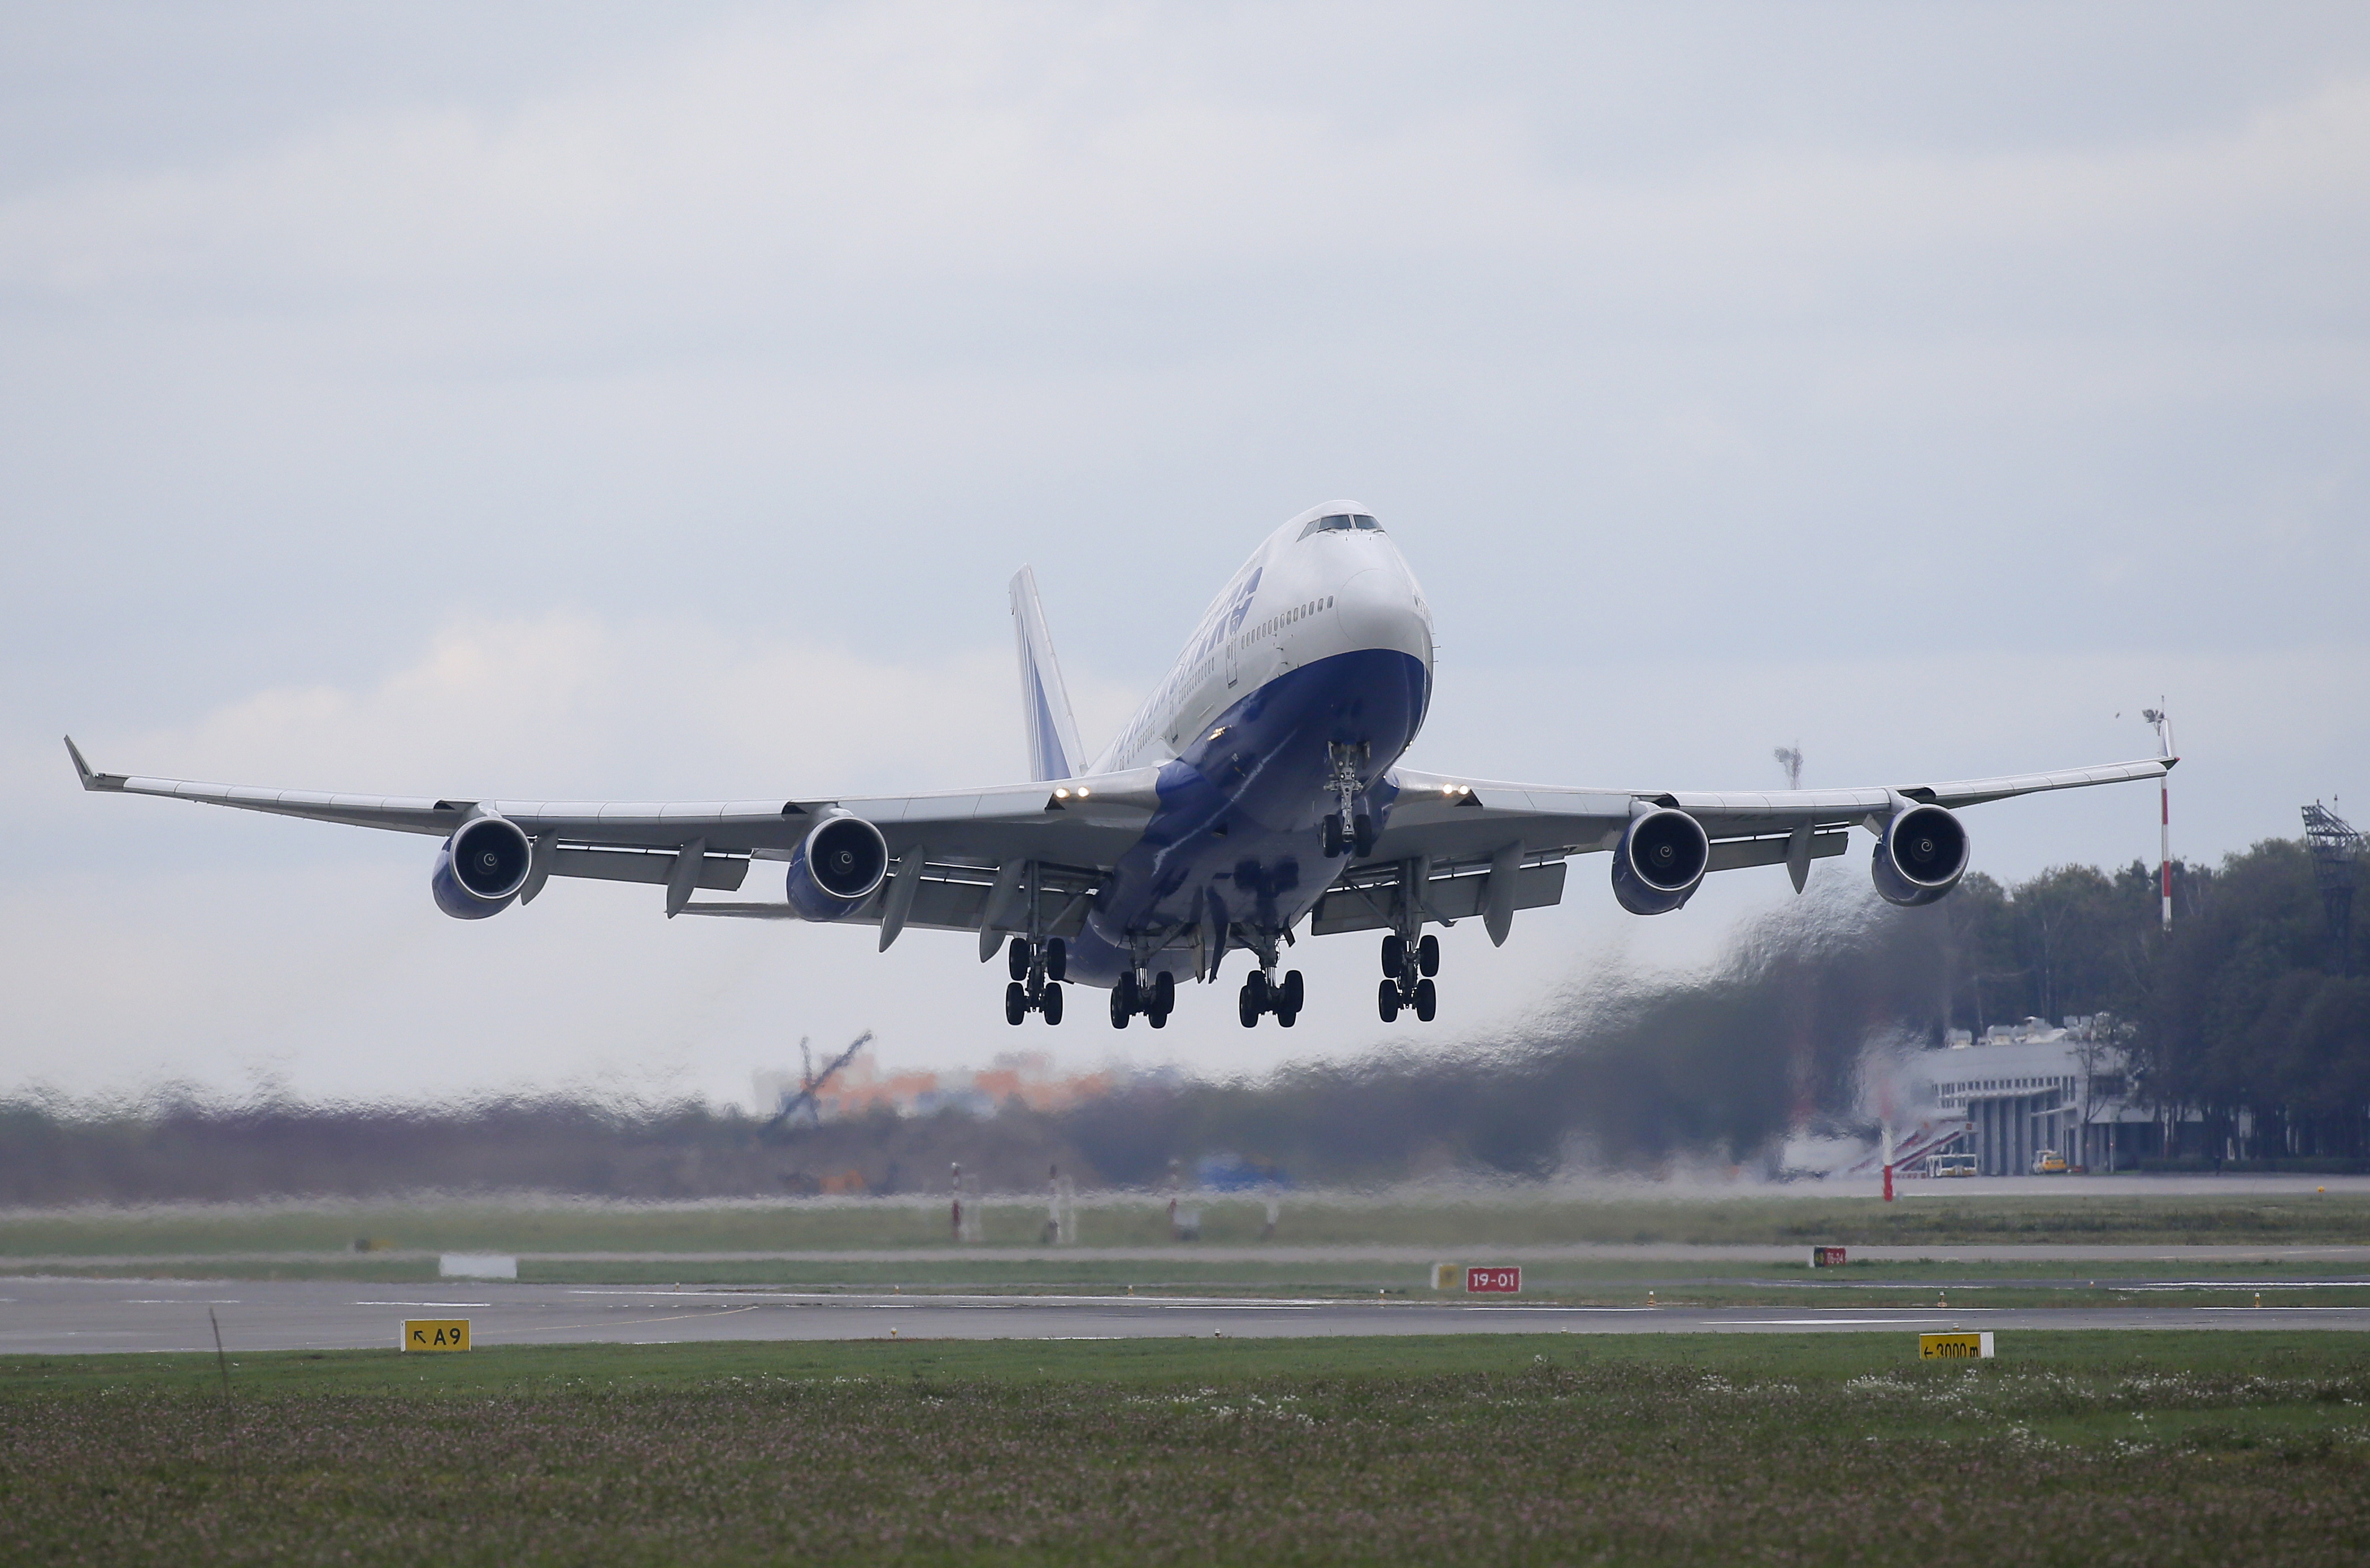 A Boeing 747-400 aircraft takes off from a runway at Moscow's Vnukovo airport, Russia